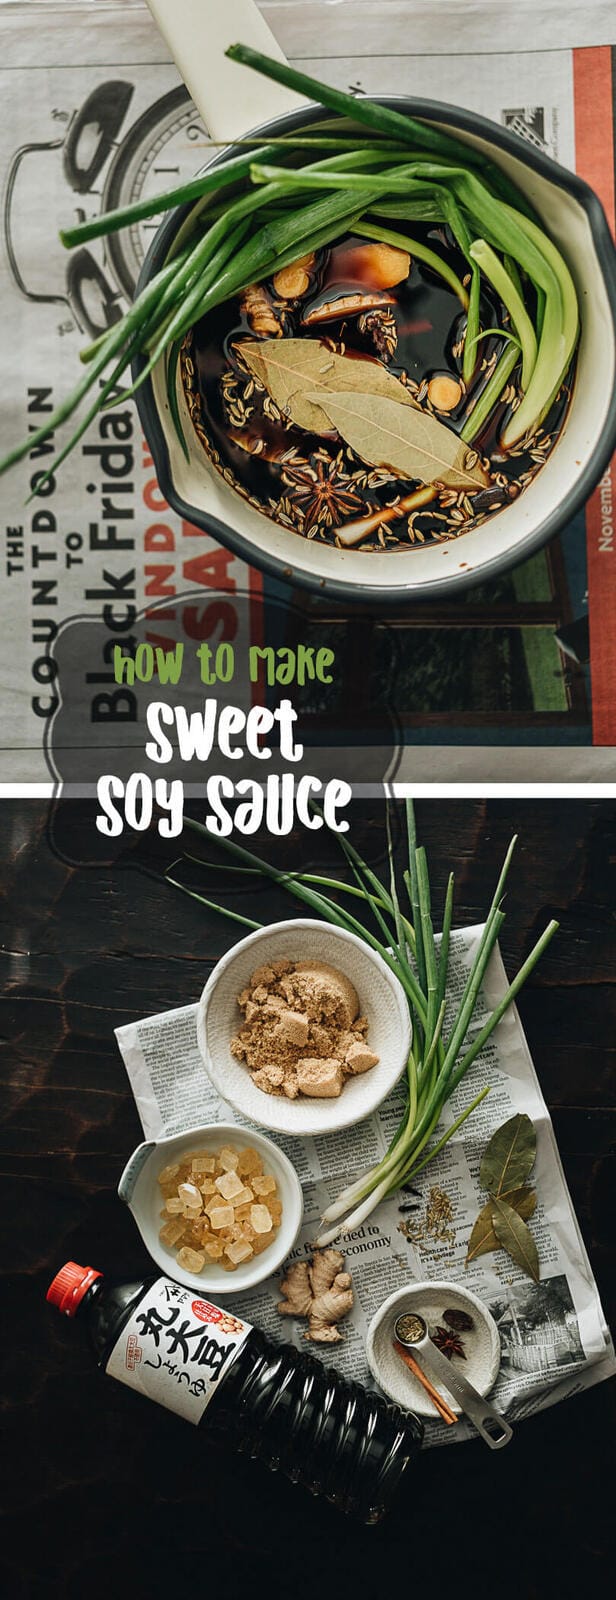 Chinese Flavored Sweet Soy Sauce (复制酱油) - Learn to make the secret ingredient that will make your Sichuan food taste extra fragrant and authentic.